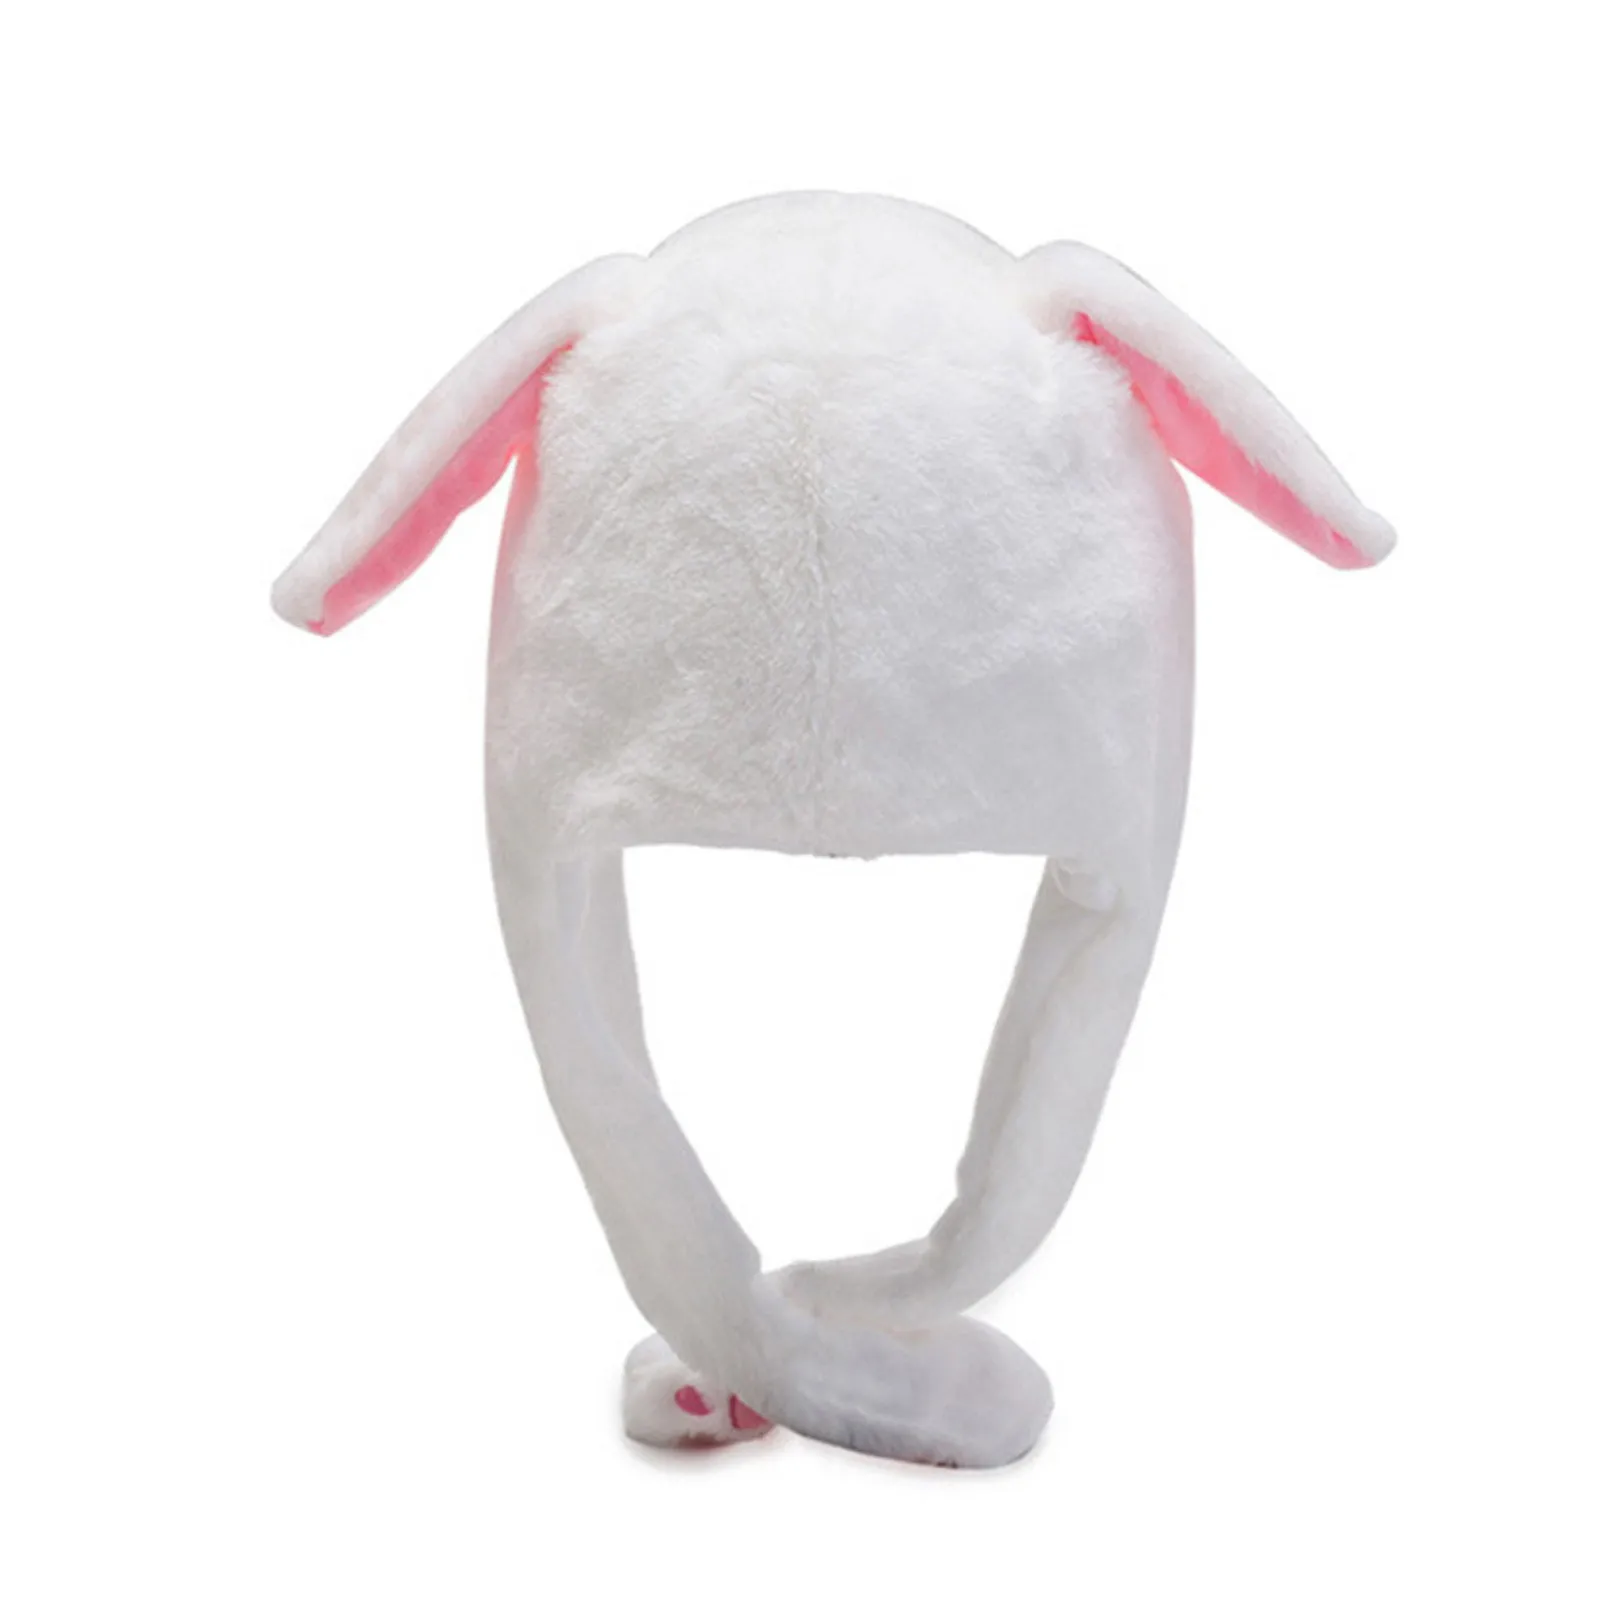 baggy beanie 2021 New Rabbit Women's Hat Beanie Plush Can Moving Bunny Ears Hat With Shine Earflaps Movable Ears Hat For Women/child/girls black skully beanie